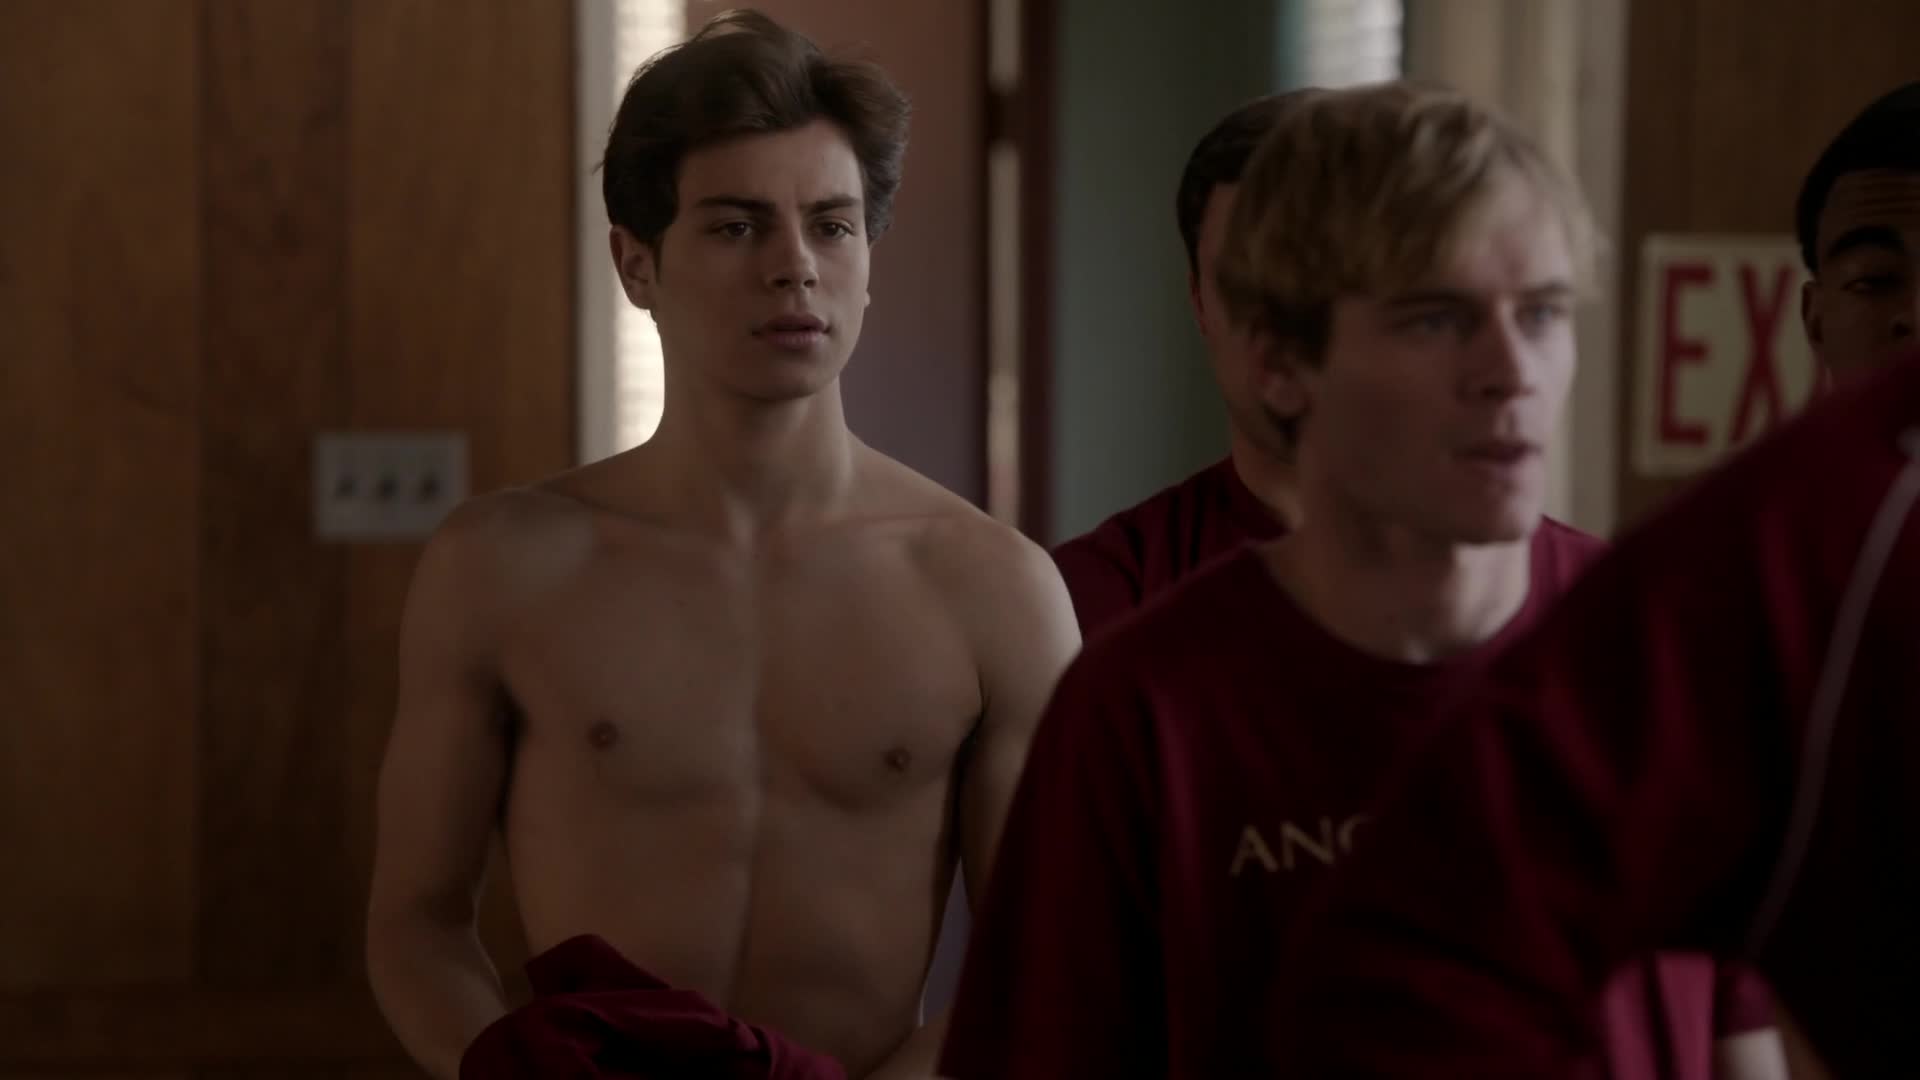 Jake T. Austin in The Fosters